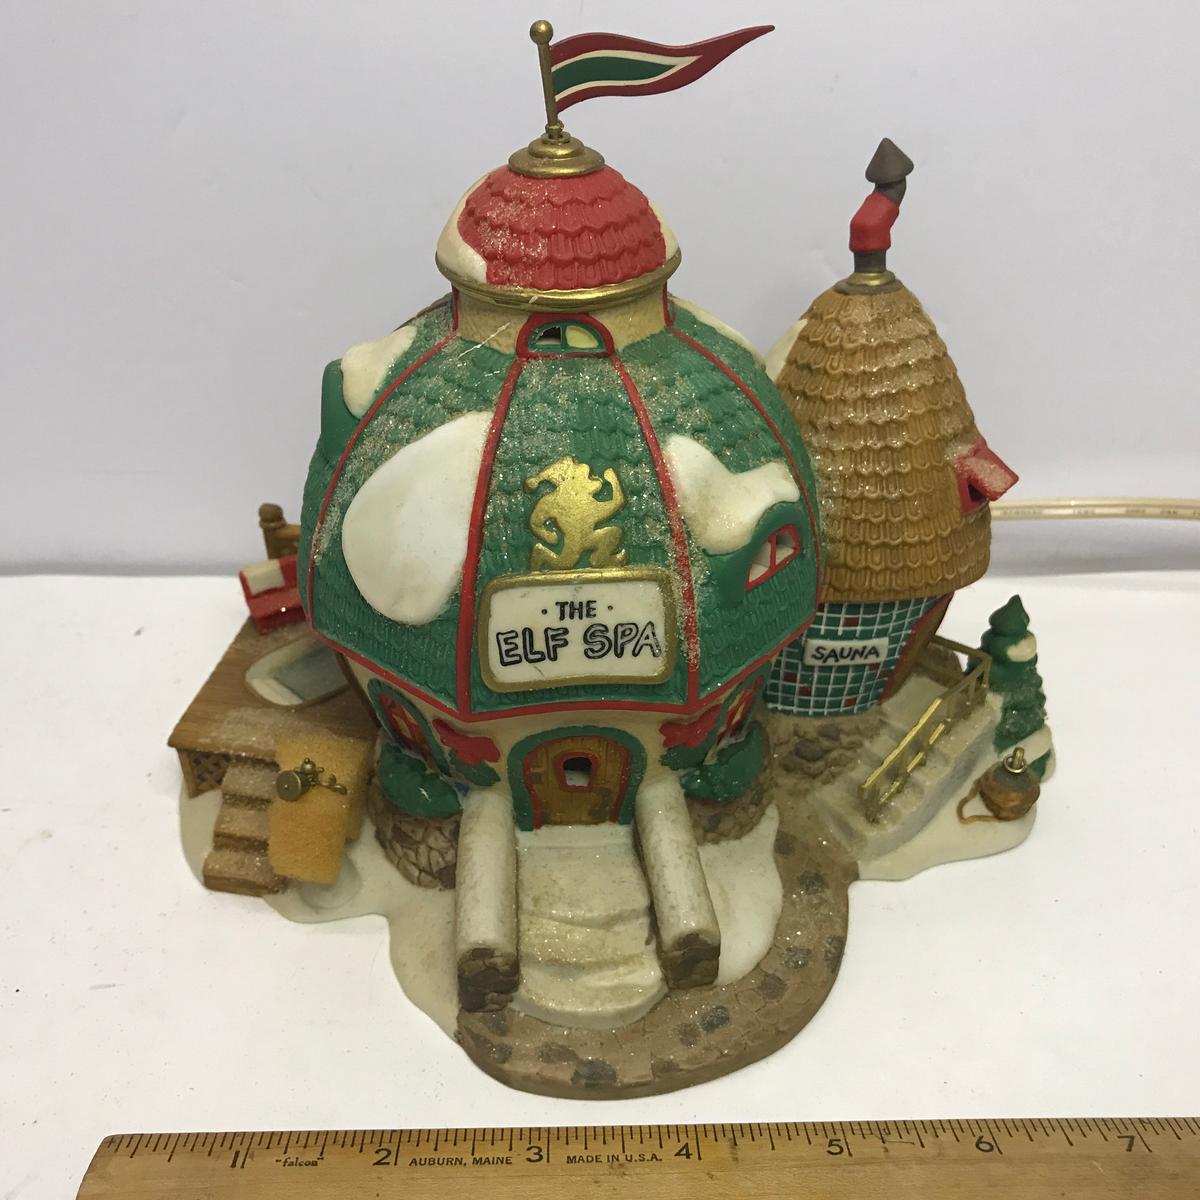 Department 56 North Pole Series "Elf Land The Elf Spa" Lighted Village House